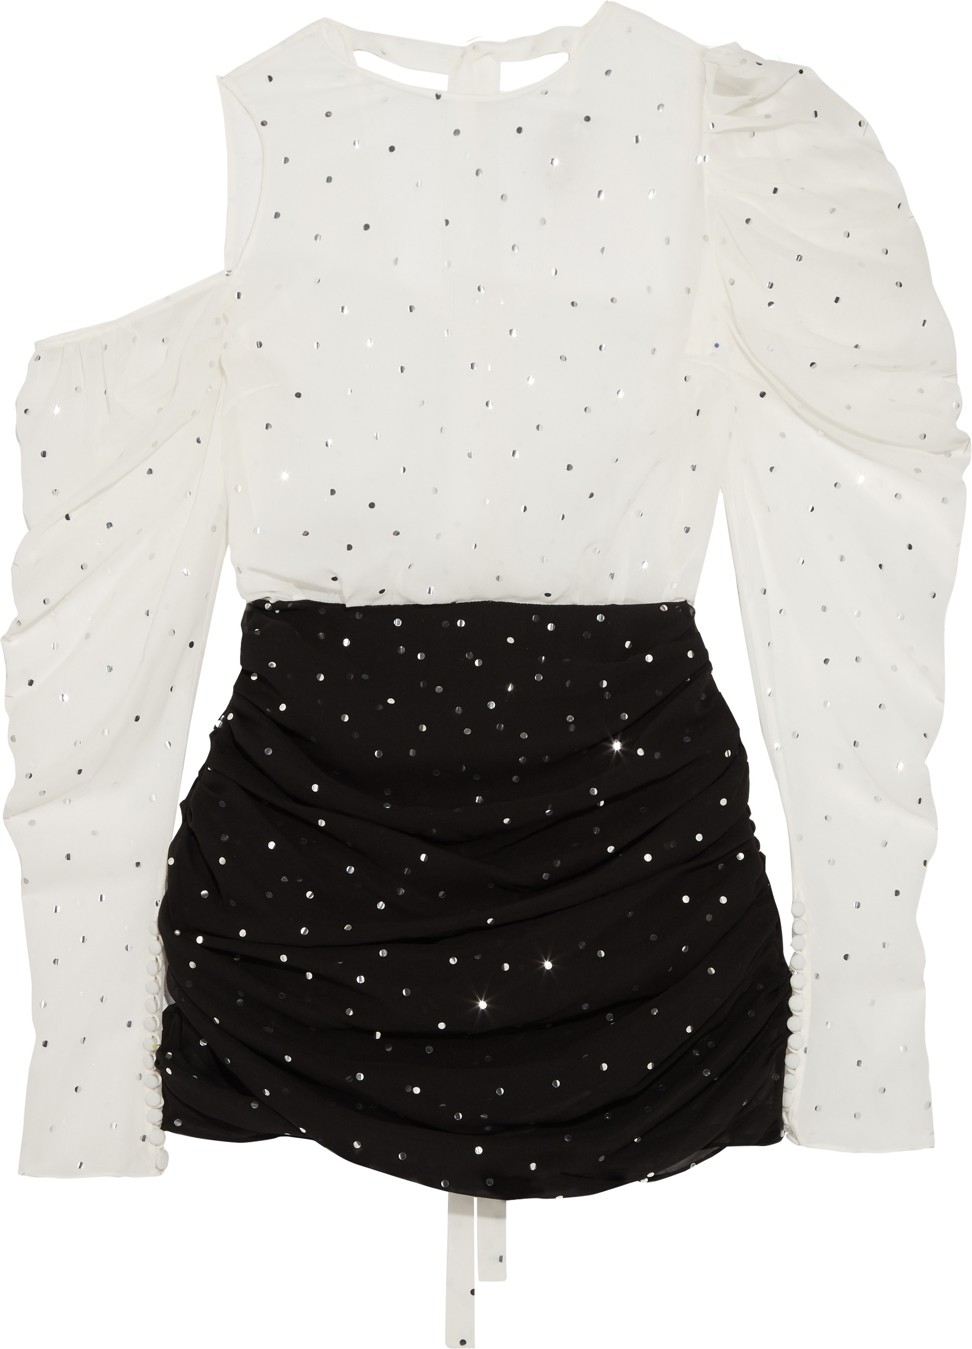 10 looks to add sparkle to your party outfits this Christmas | South ...